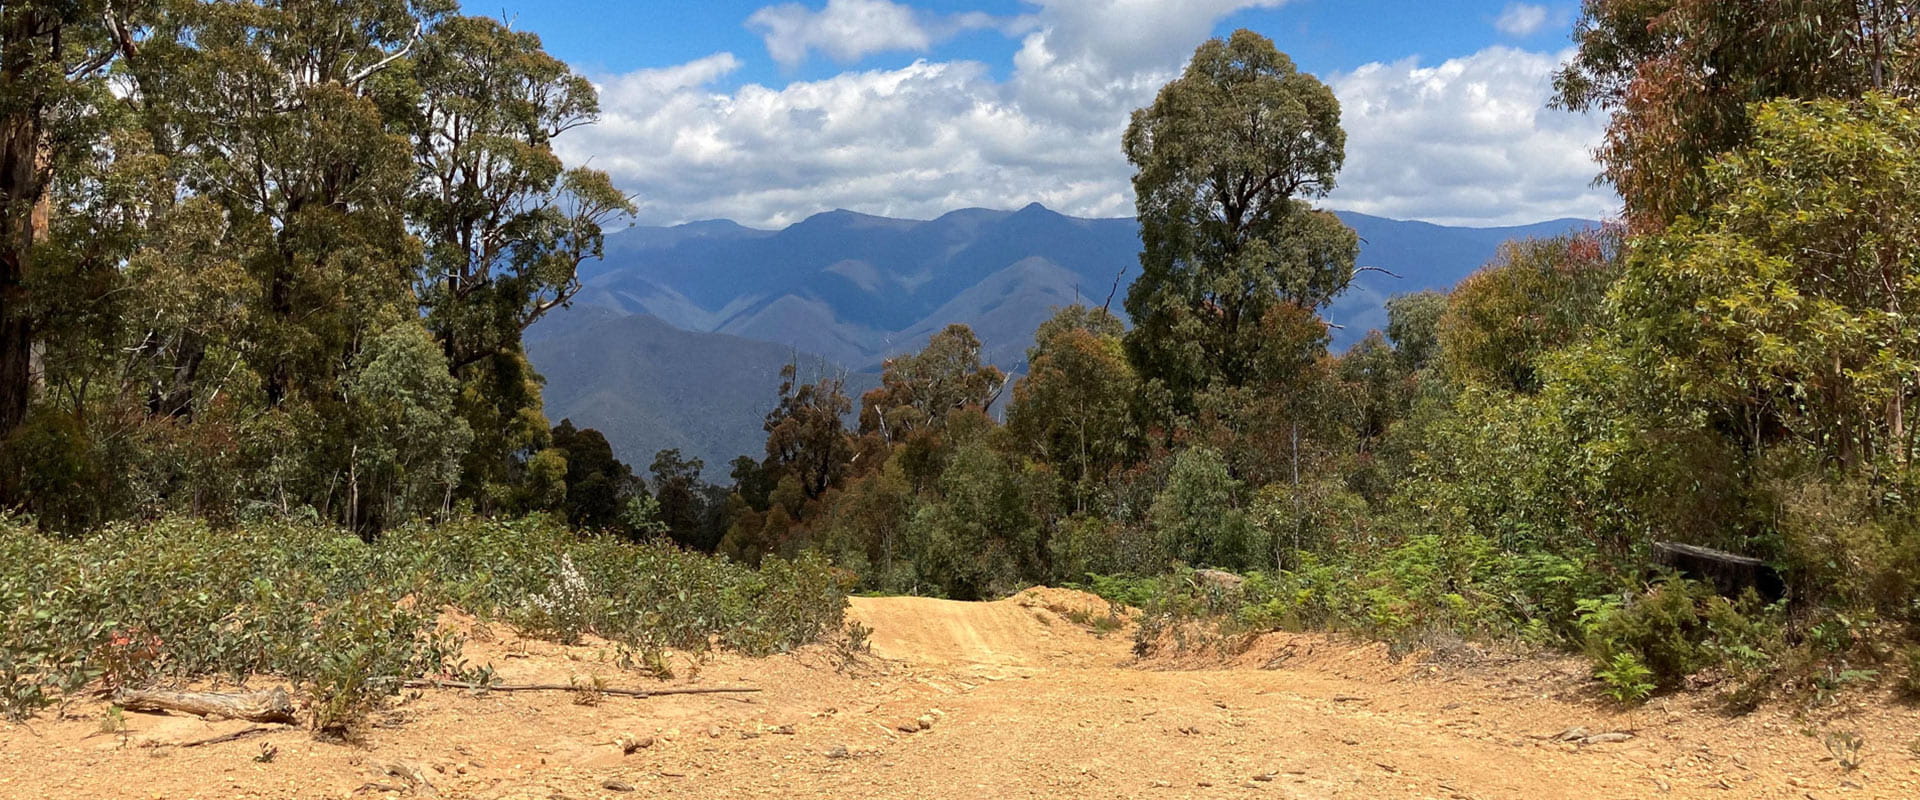 A dirt road leads towards a large mountain range that rises from rugged bushland.